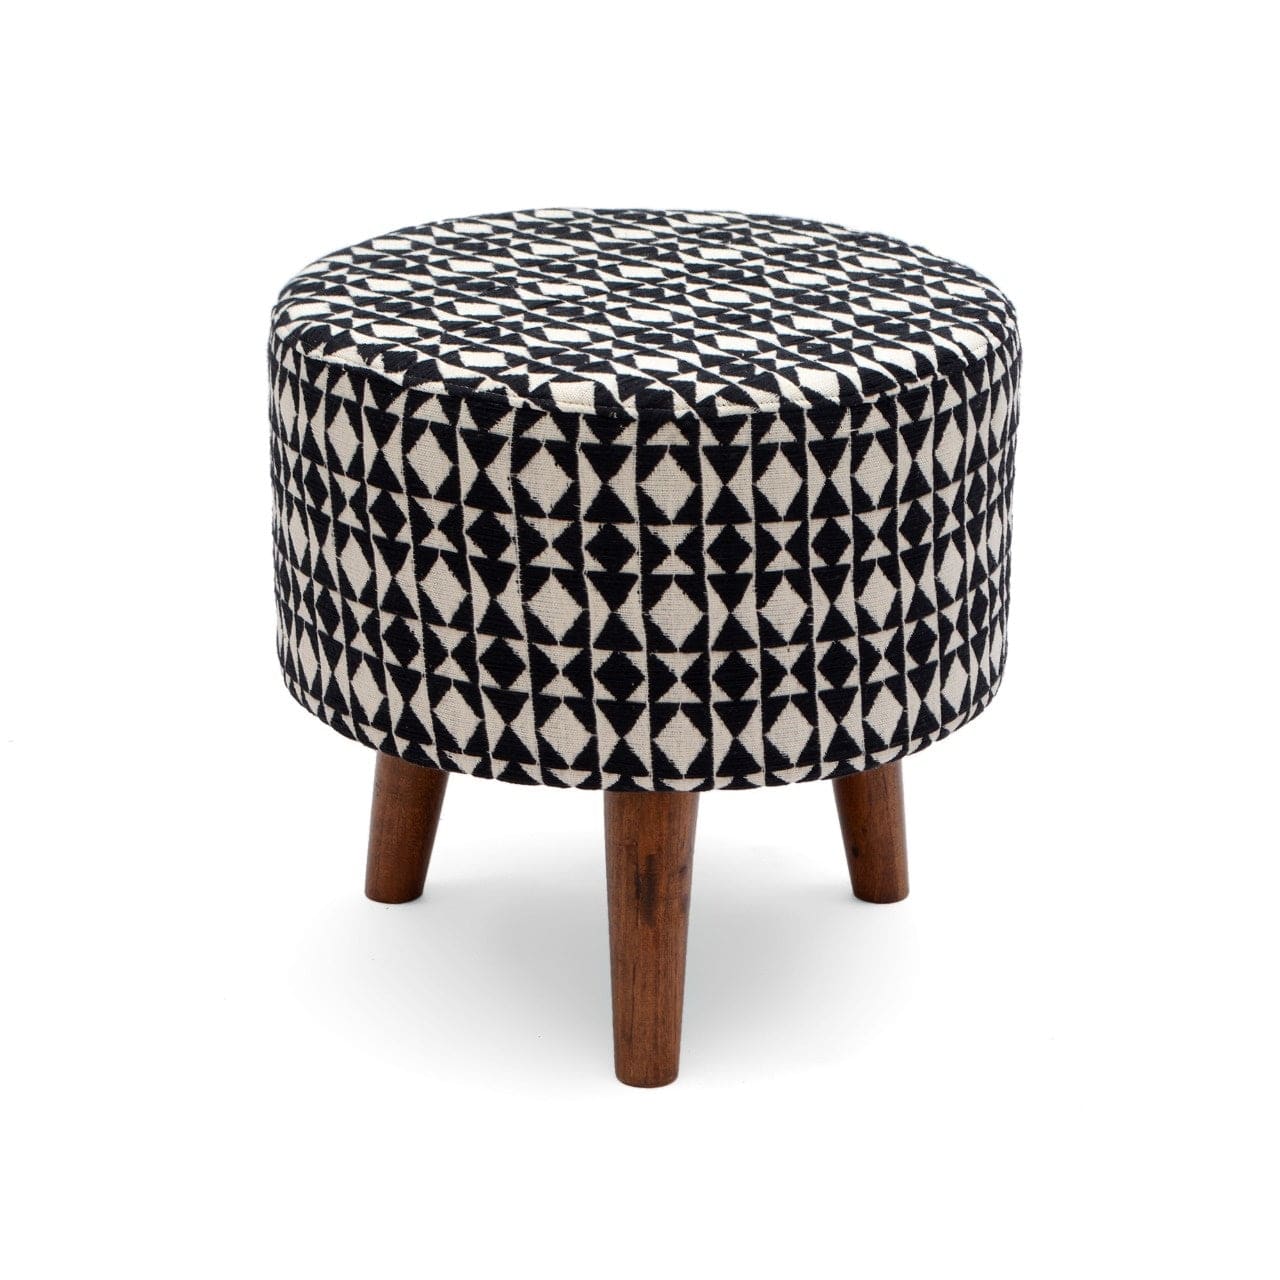 Frenso Colby Mango Wood Foot Stool In emerald Black Colour